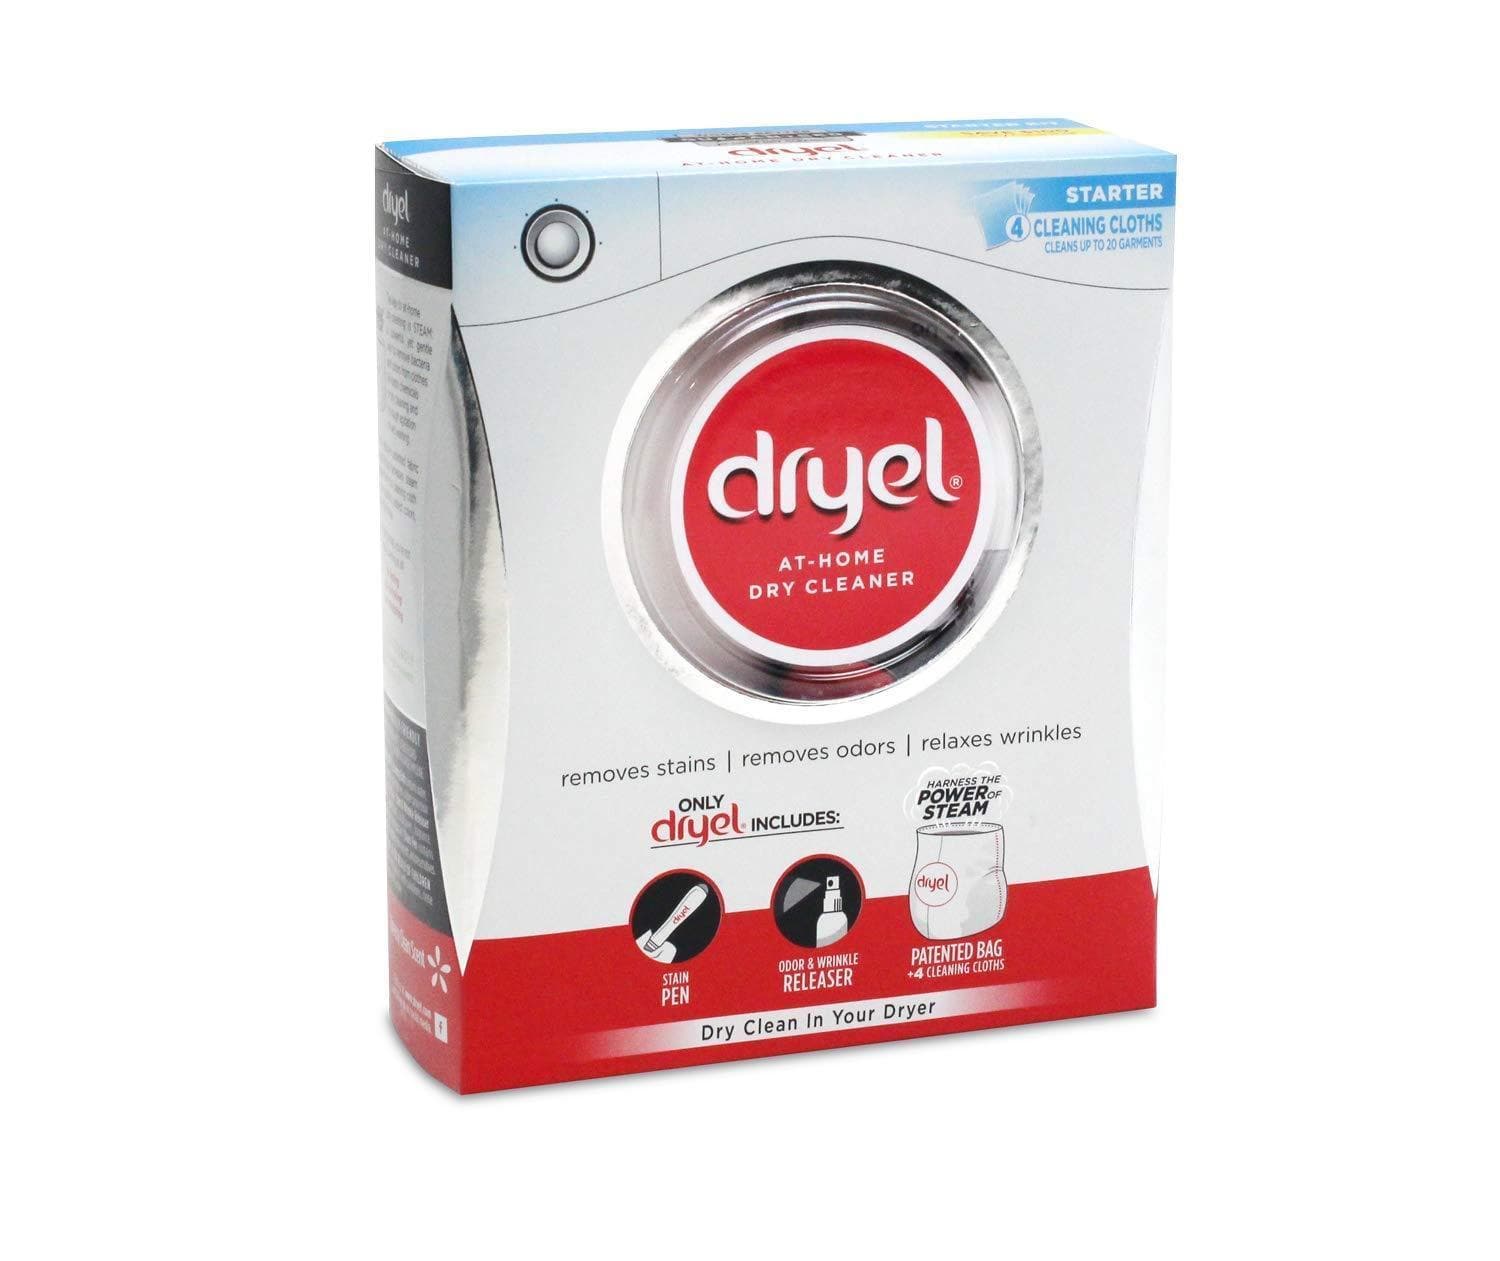 Dryel At-Home Dry Cleaner Starter Kit (Mega Pack) – Ella Home Essentials  Distributor of Home Dry Cleaning Kits in New Zealand and Australia